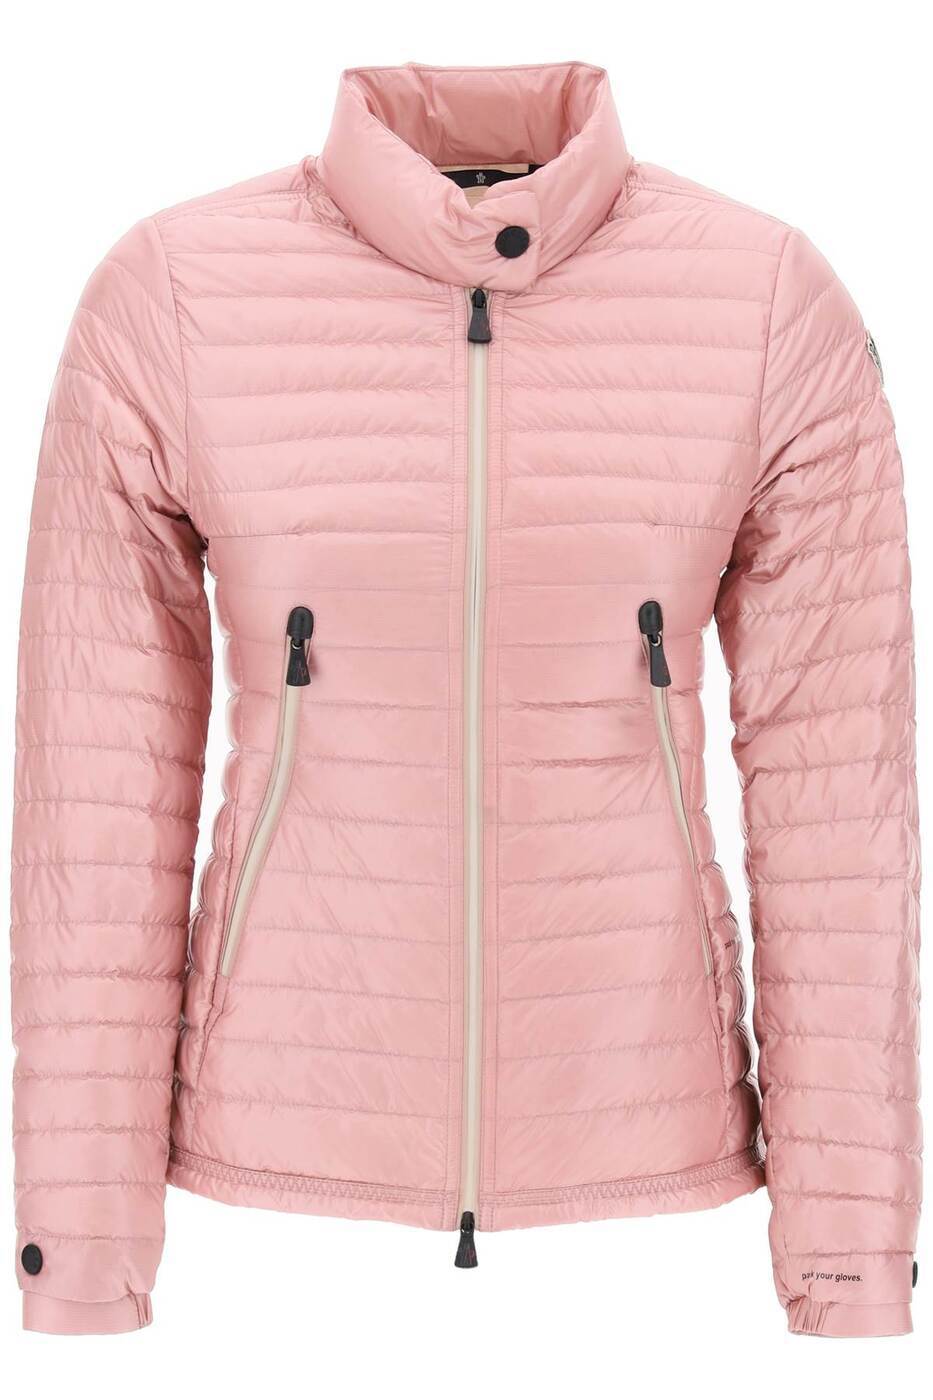 MONCLER GRENOBLE モンクレール グルーノーブス ピンク Rosa Moncler grenoble lightweight pontaix ジ..